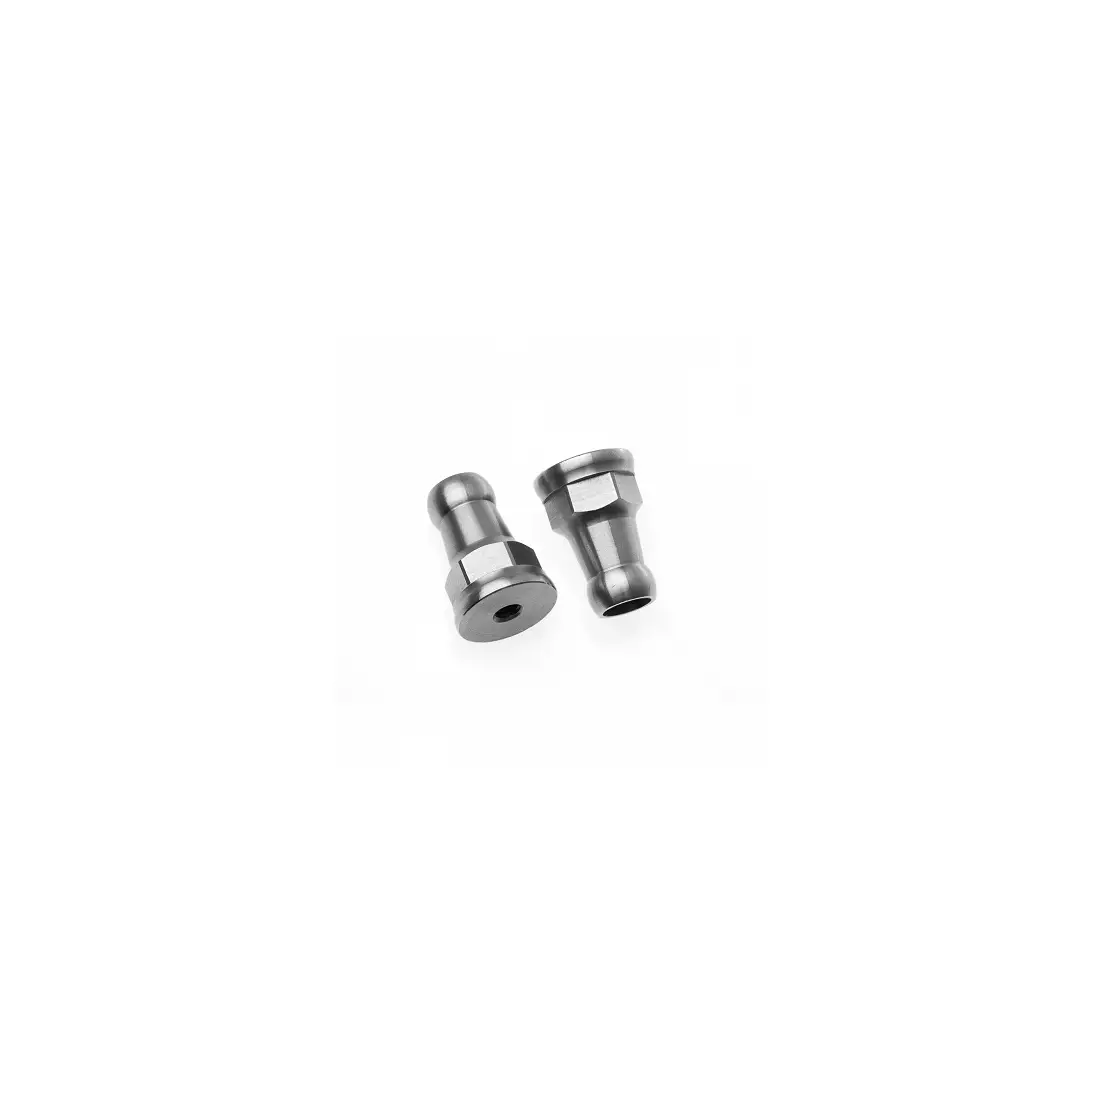 EXTRAWHEEL nuts for bicycle hubs M10x1mm E0005